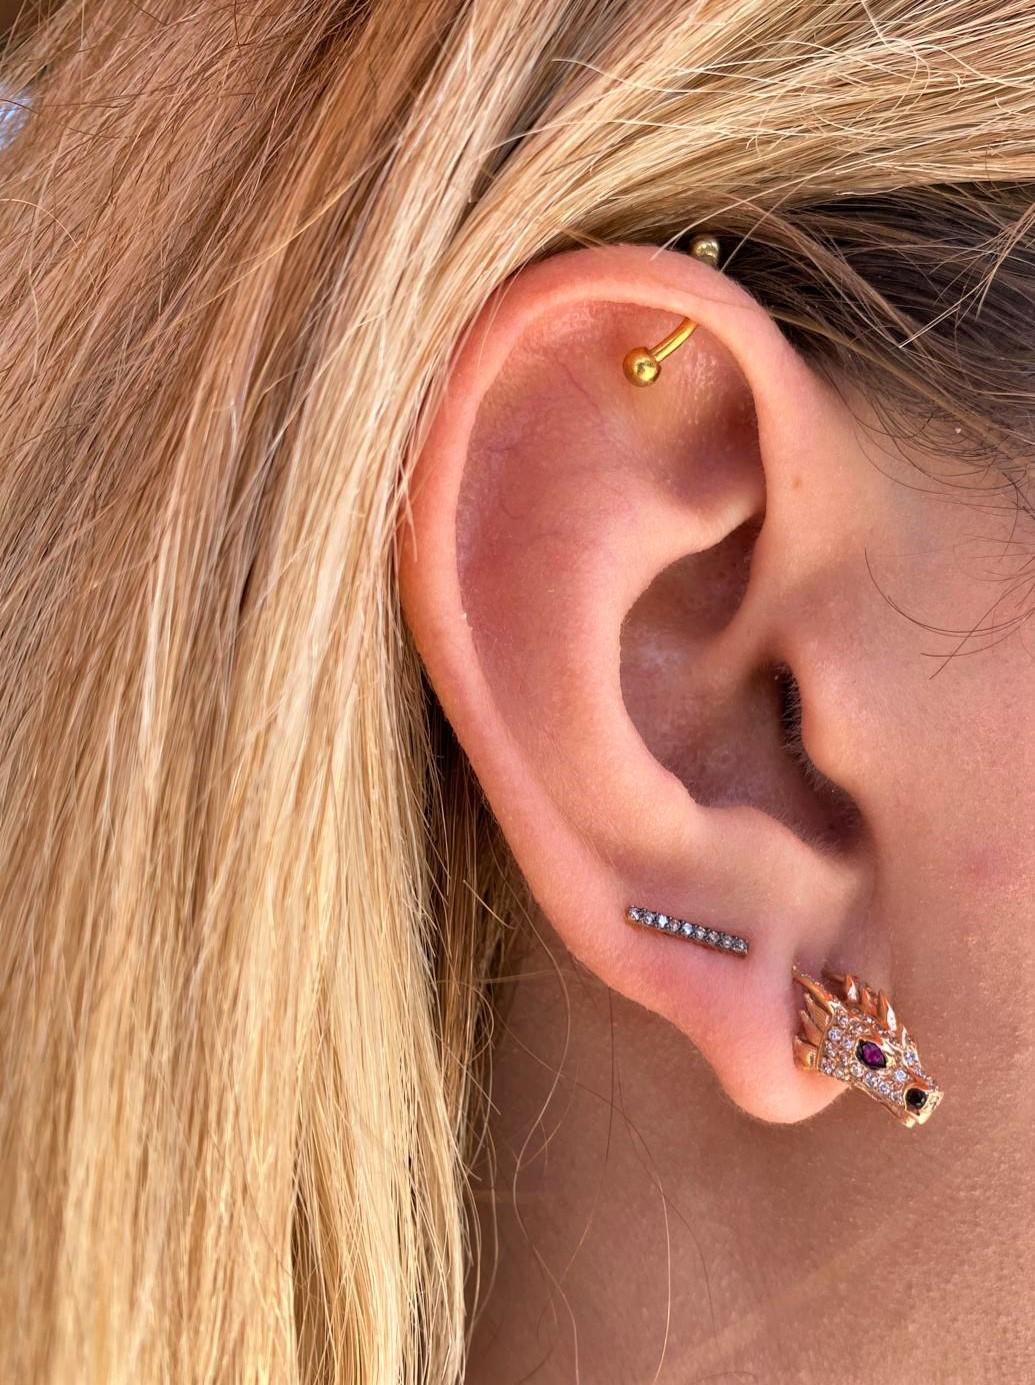 Dragon Lady Collection is inspired by the fire element which is one of the elements that represents our life energy. The main form of the collection is dragon; it is the symbol of strength, courage and prosperity. 

Ananta sesha stud earring